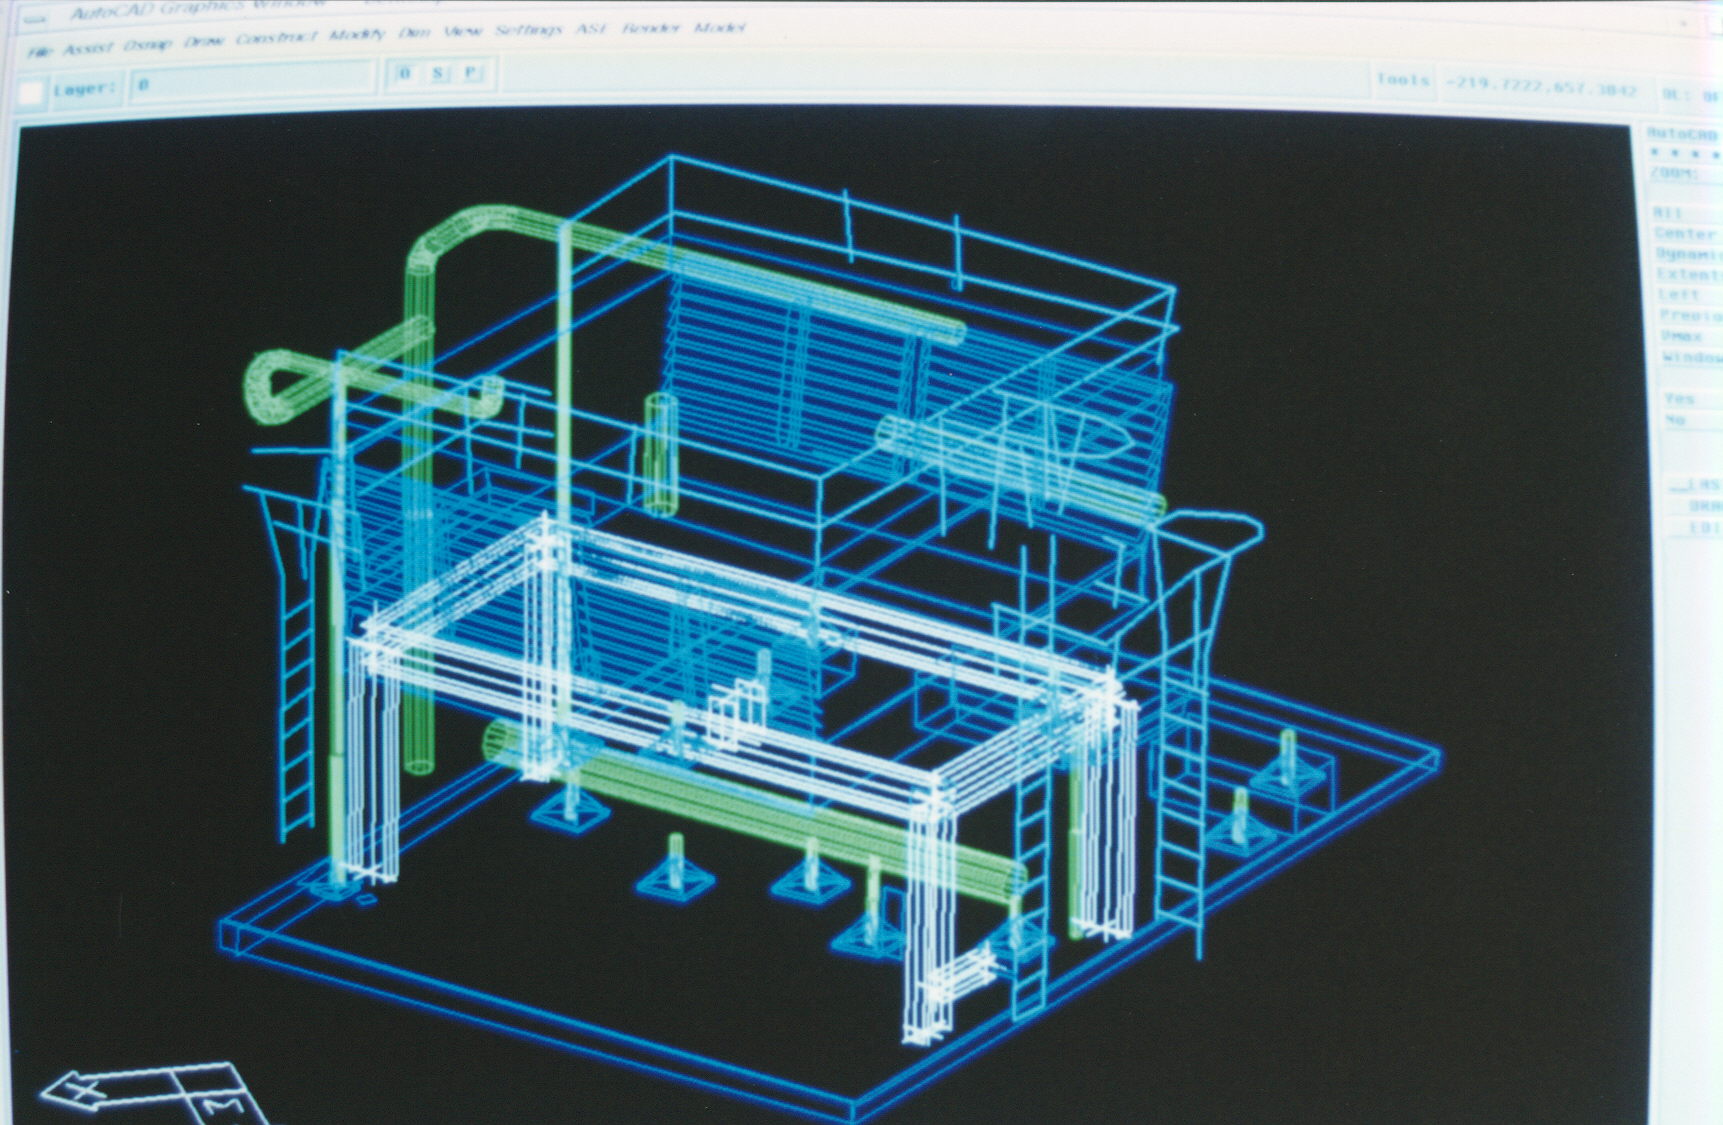 AutoCAD representation of equipment and structure created from scans. Scans were modeled in Cyra’s point cloud software and the model was exported to AutoCAD.